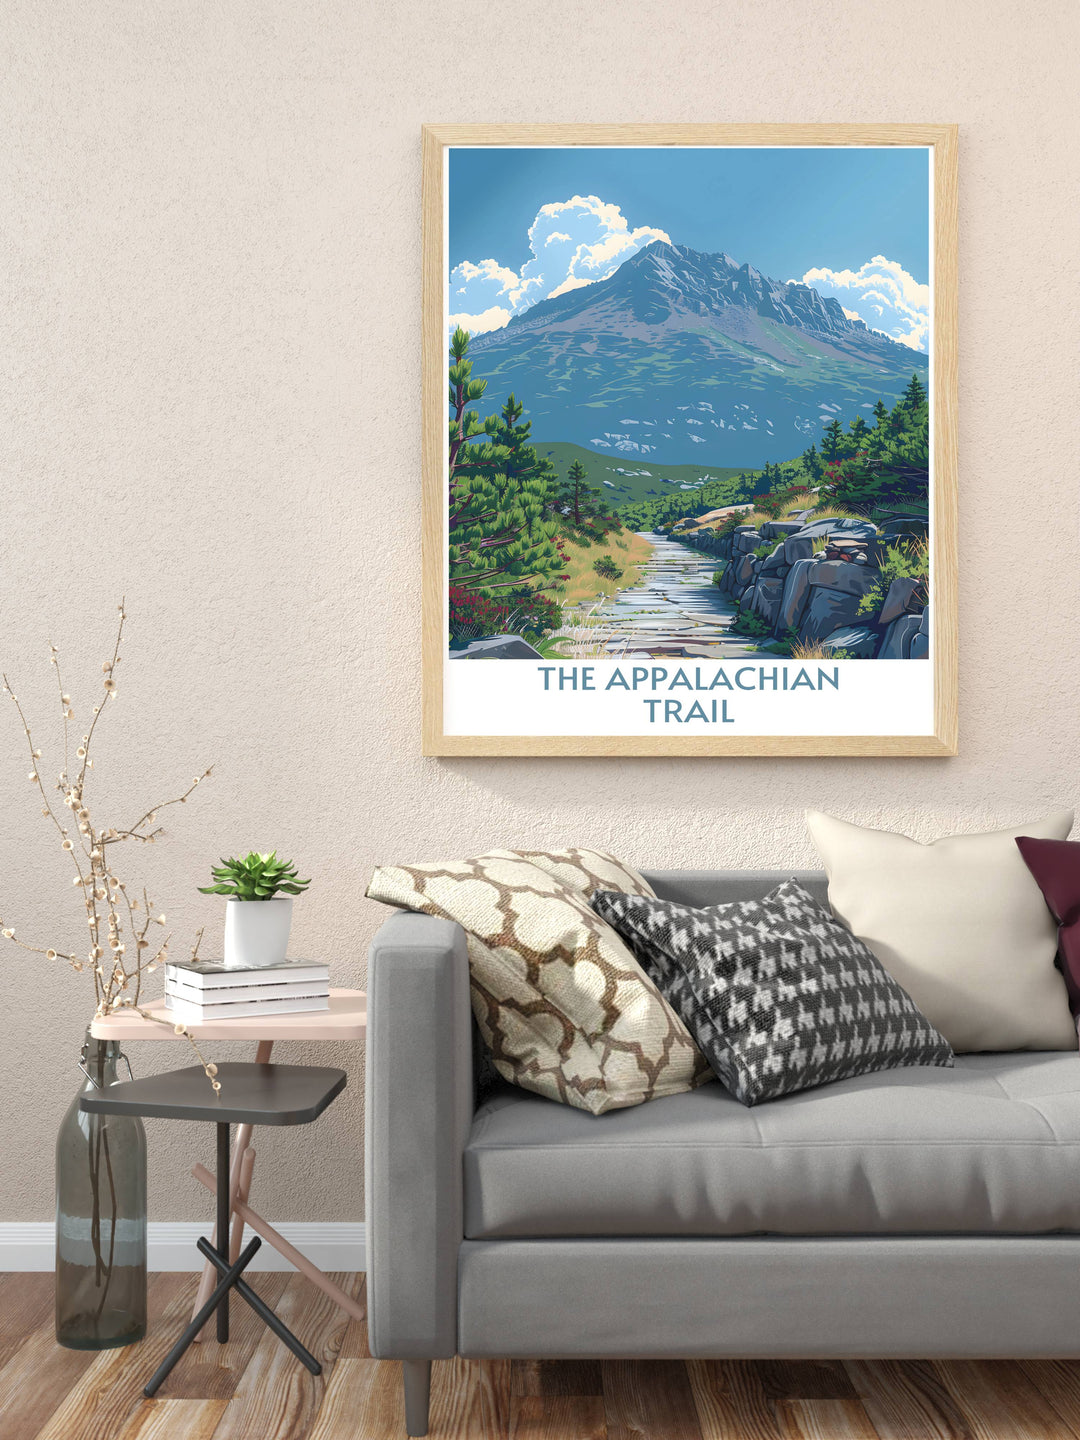 Celebrate the pinnacle of the Appalachian Trail with this Mount Katahdin artwork, featuring detailed natural scenes and vibrant colors.